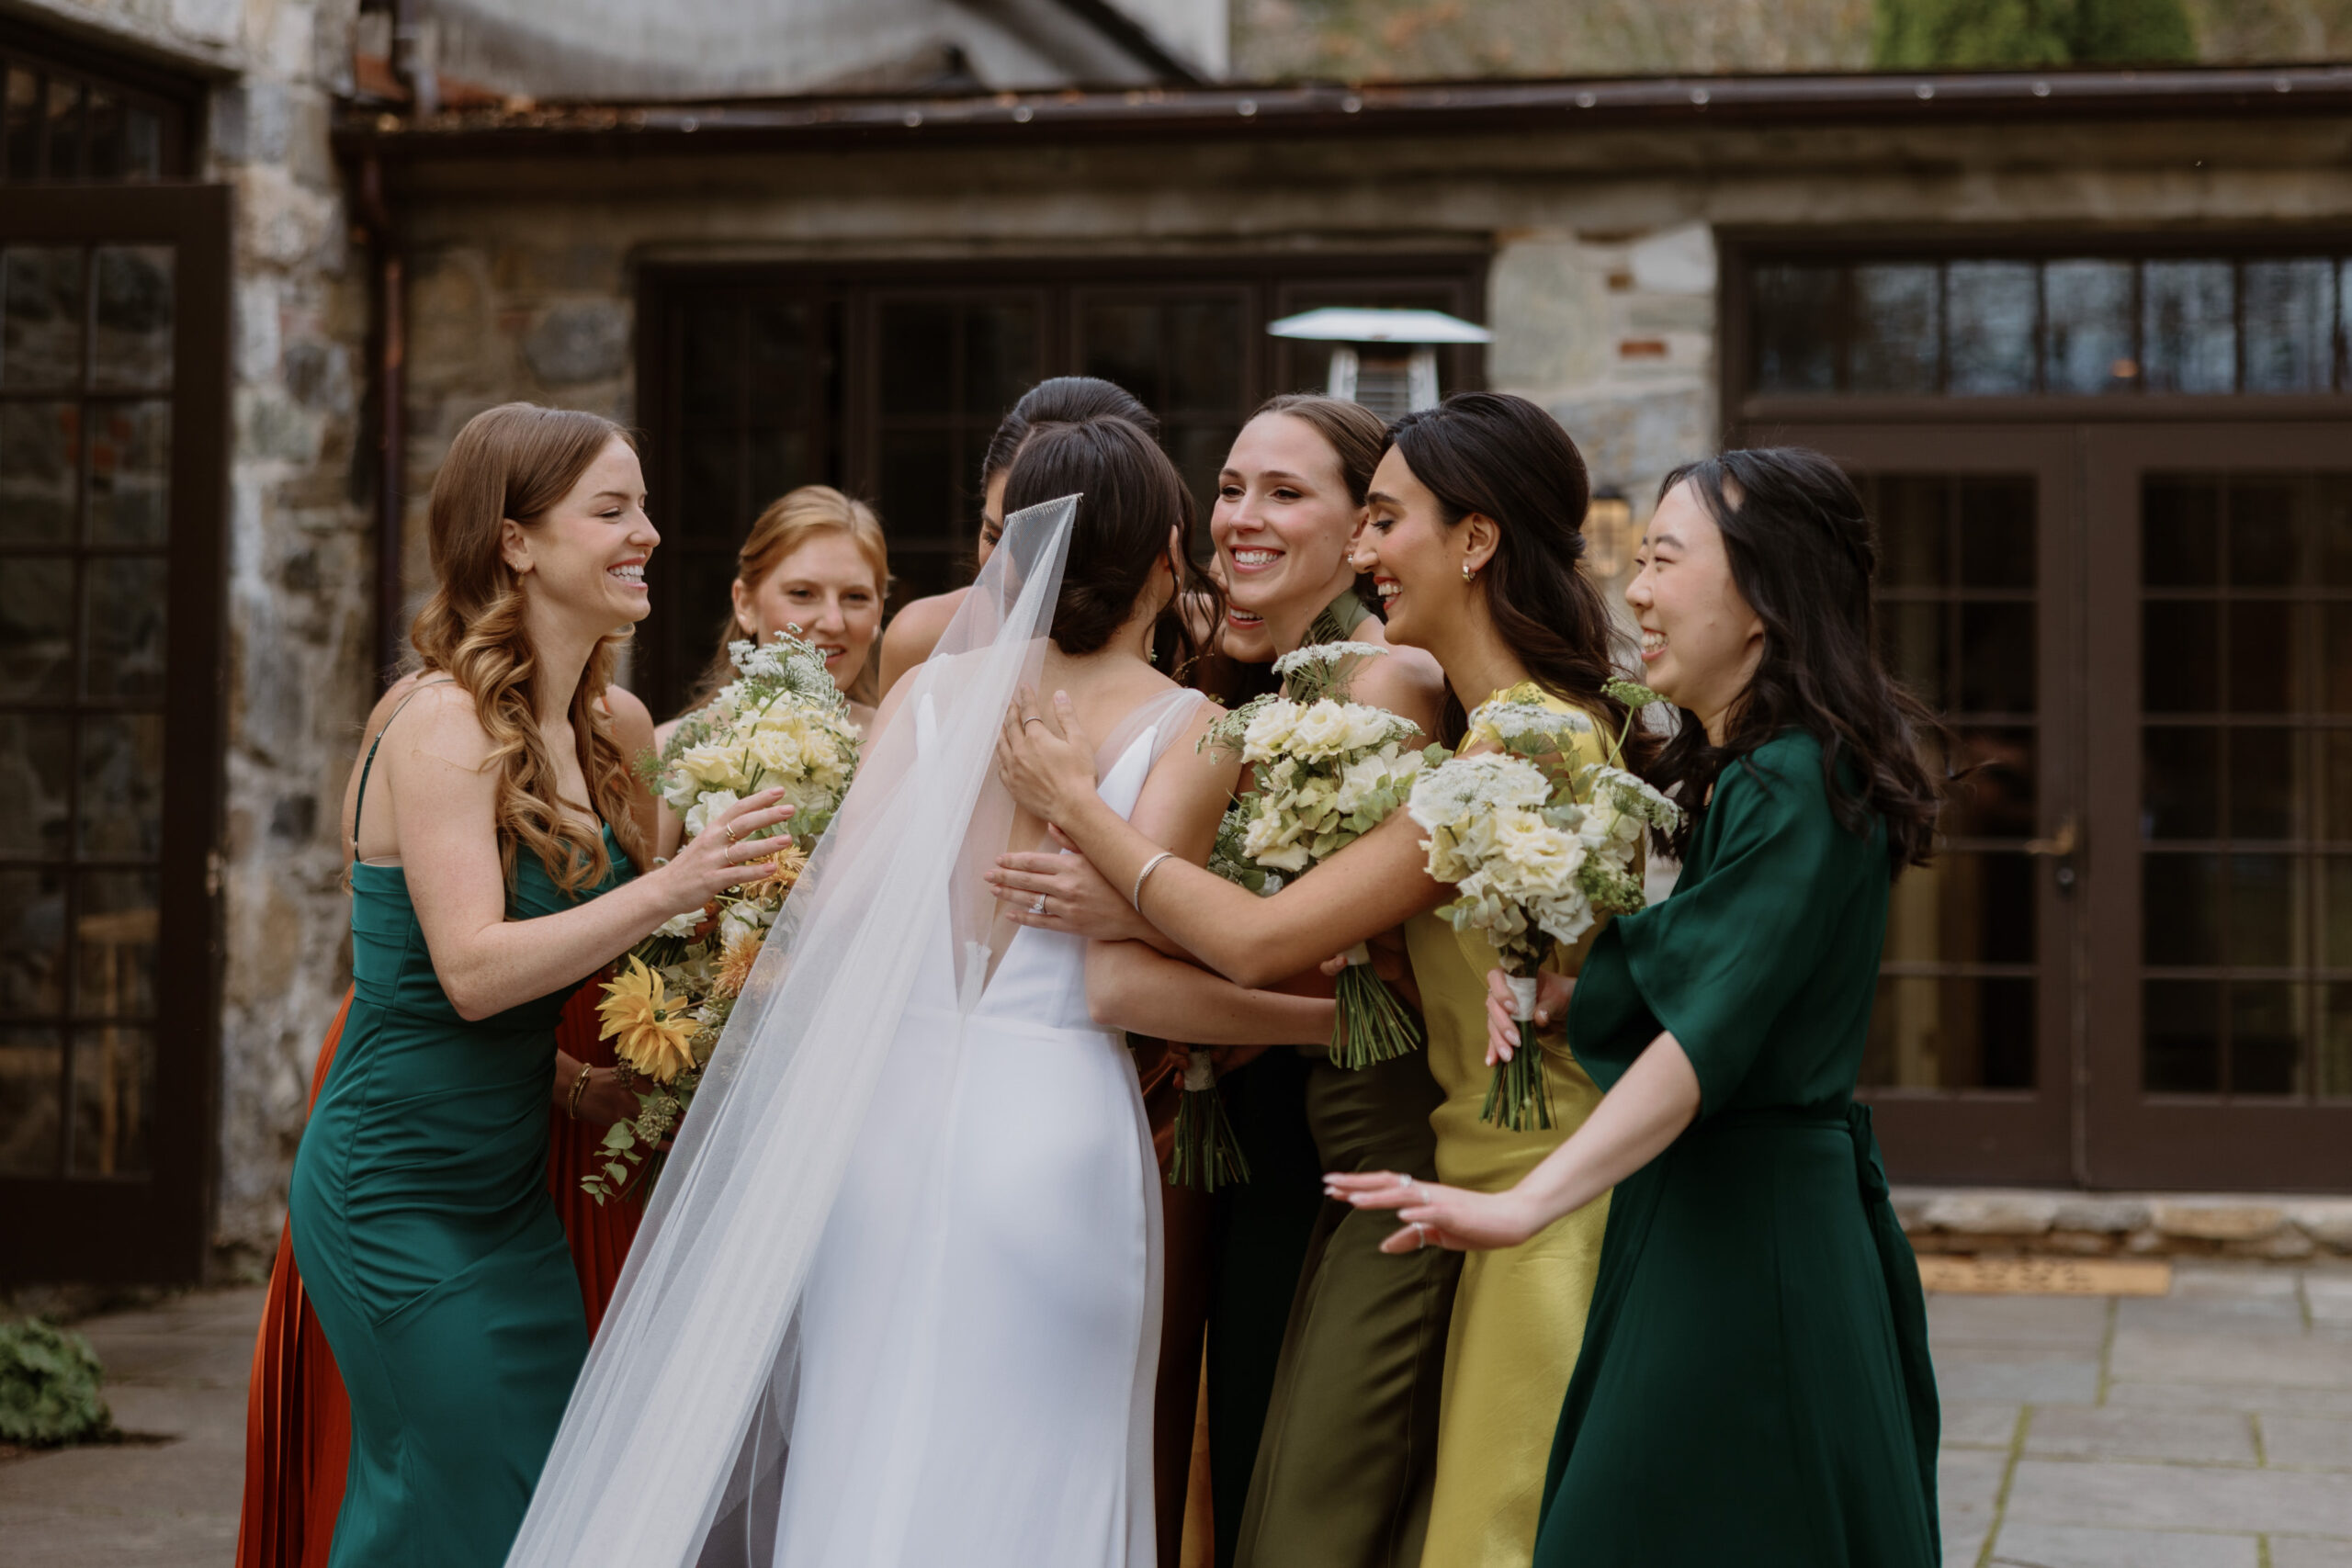 The bride and bridesmaids excitedly hugging each other before the first look. Photojournalistic wedding photography image by Jenny Fu Studio